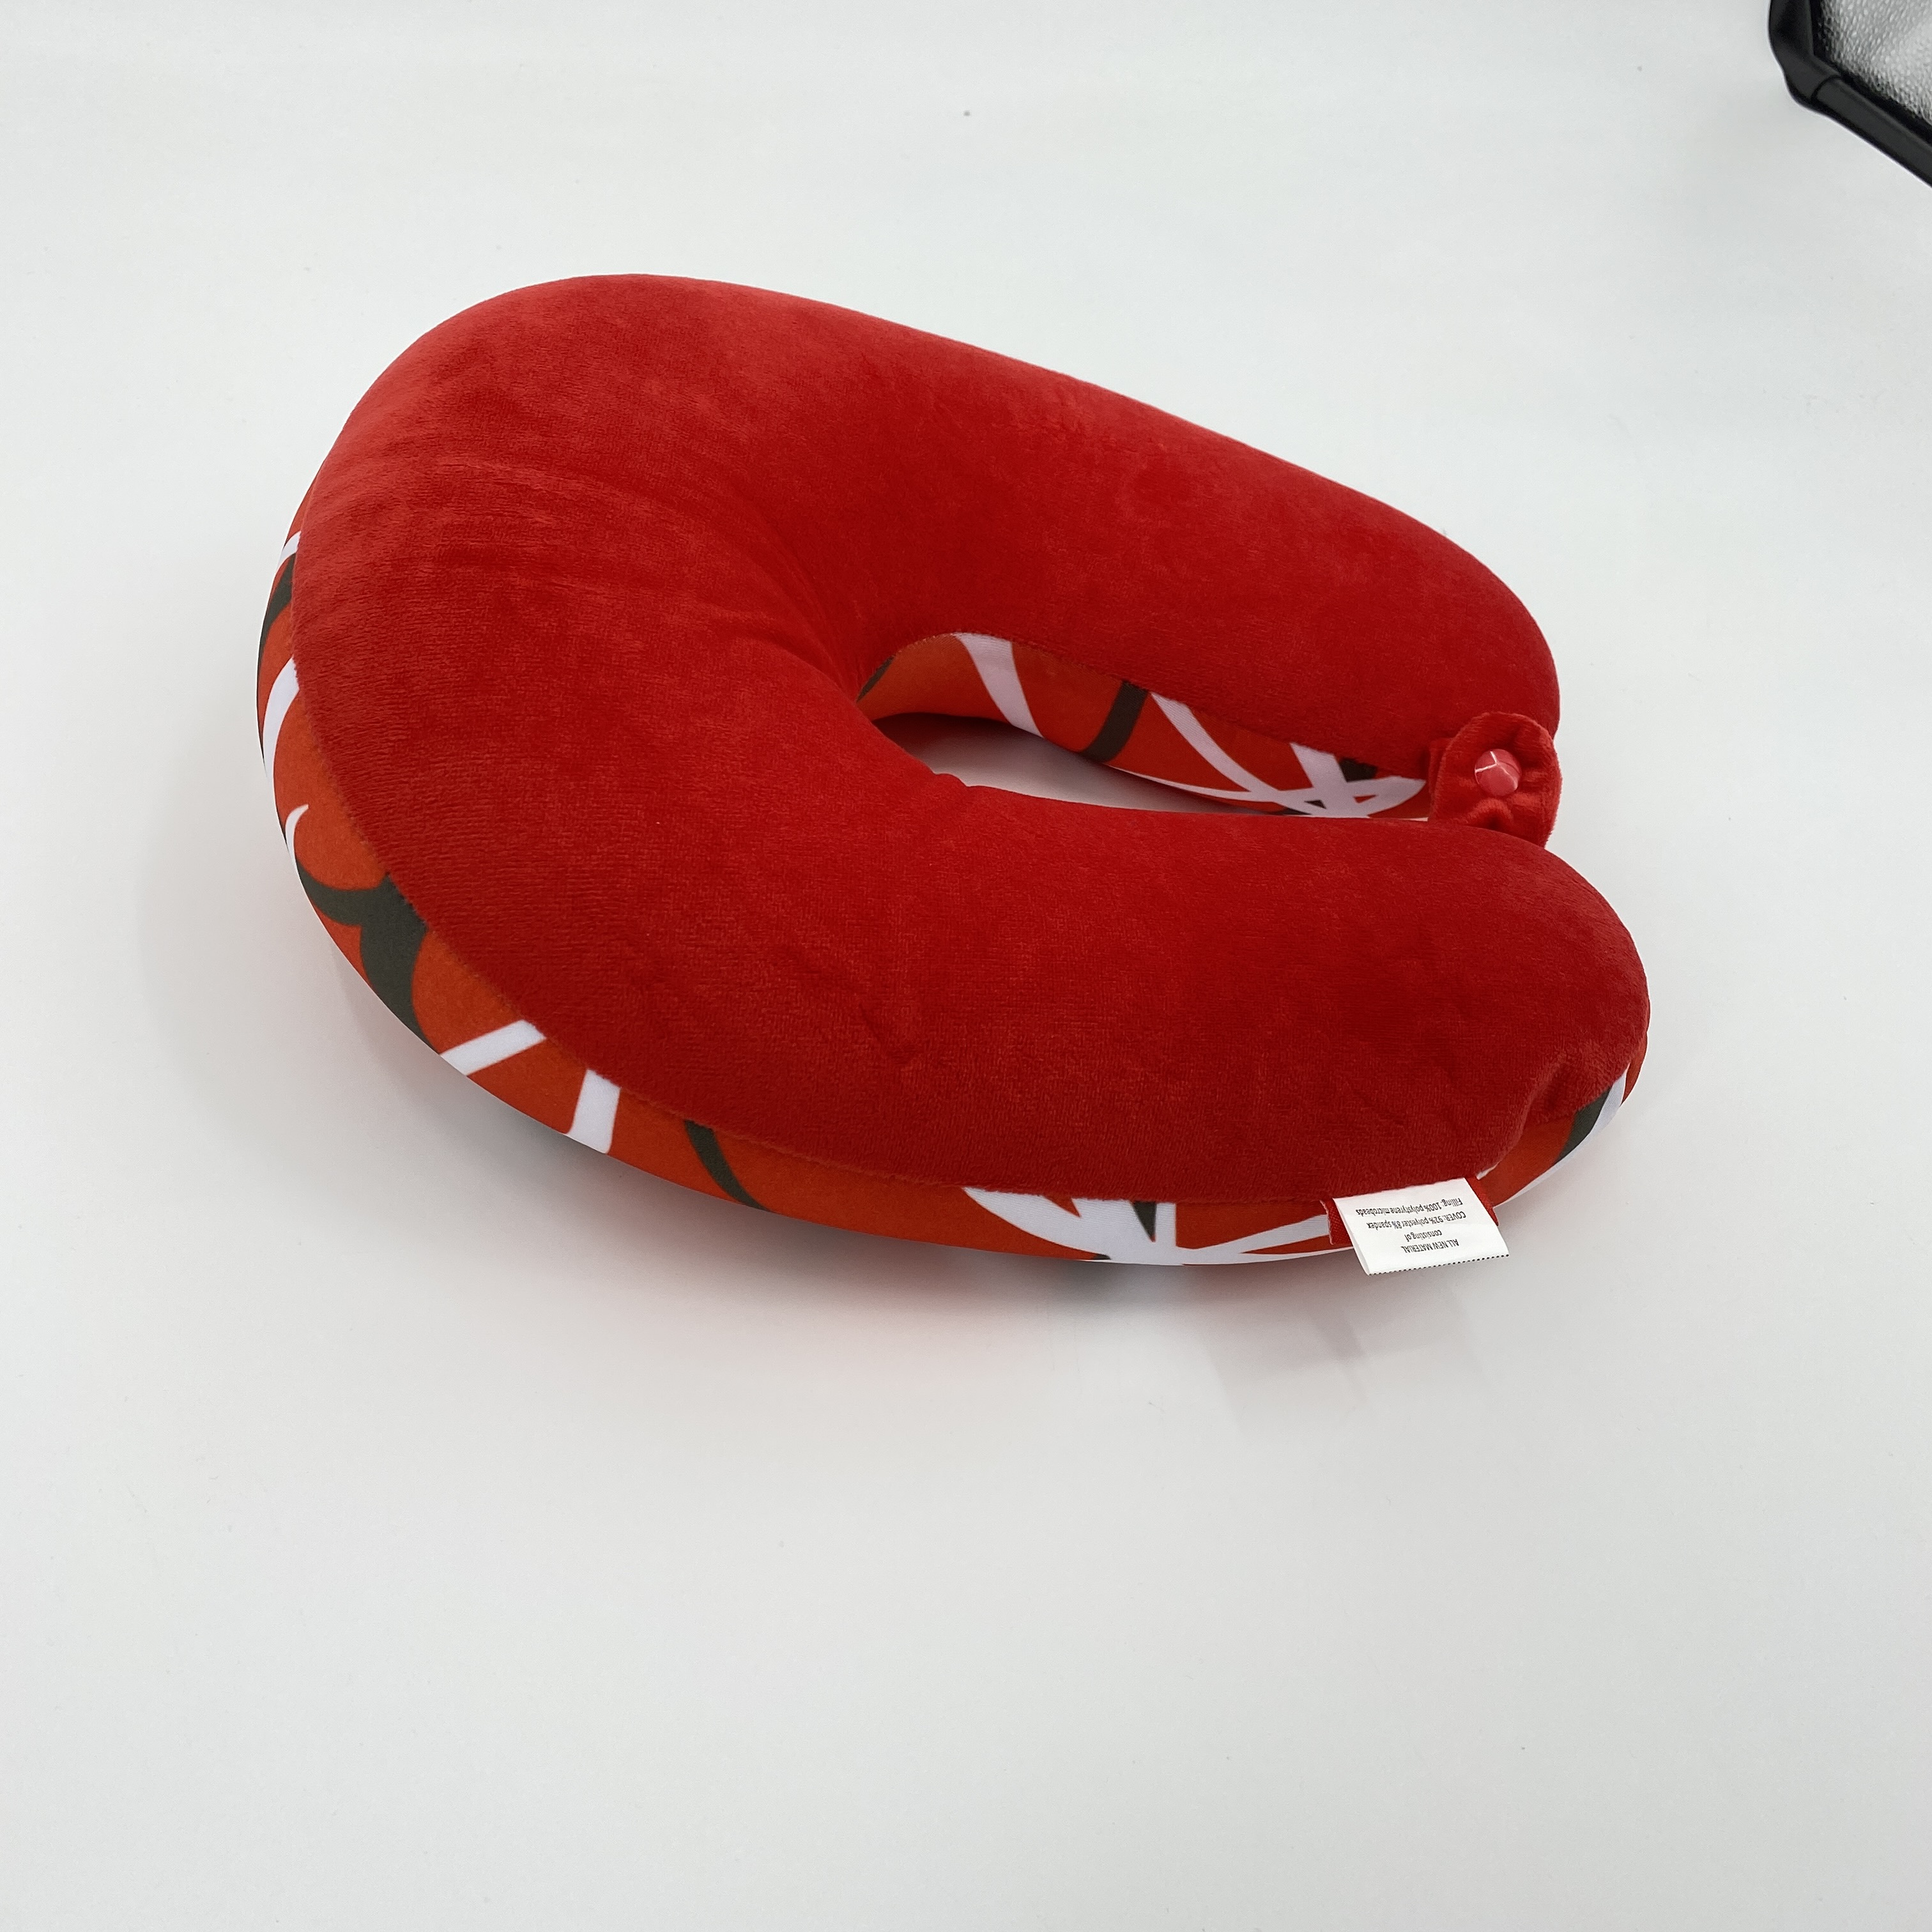 Bookishbunny Ultralight Micro Beads U Shaped Neck Pillow Travel Head Cervical Support Cushion Red Black - image 2 of 5